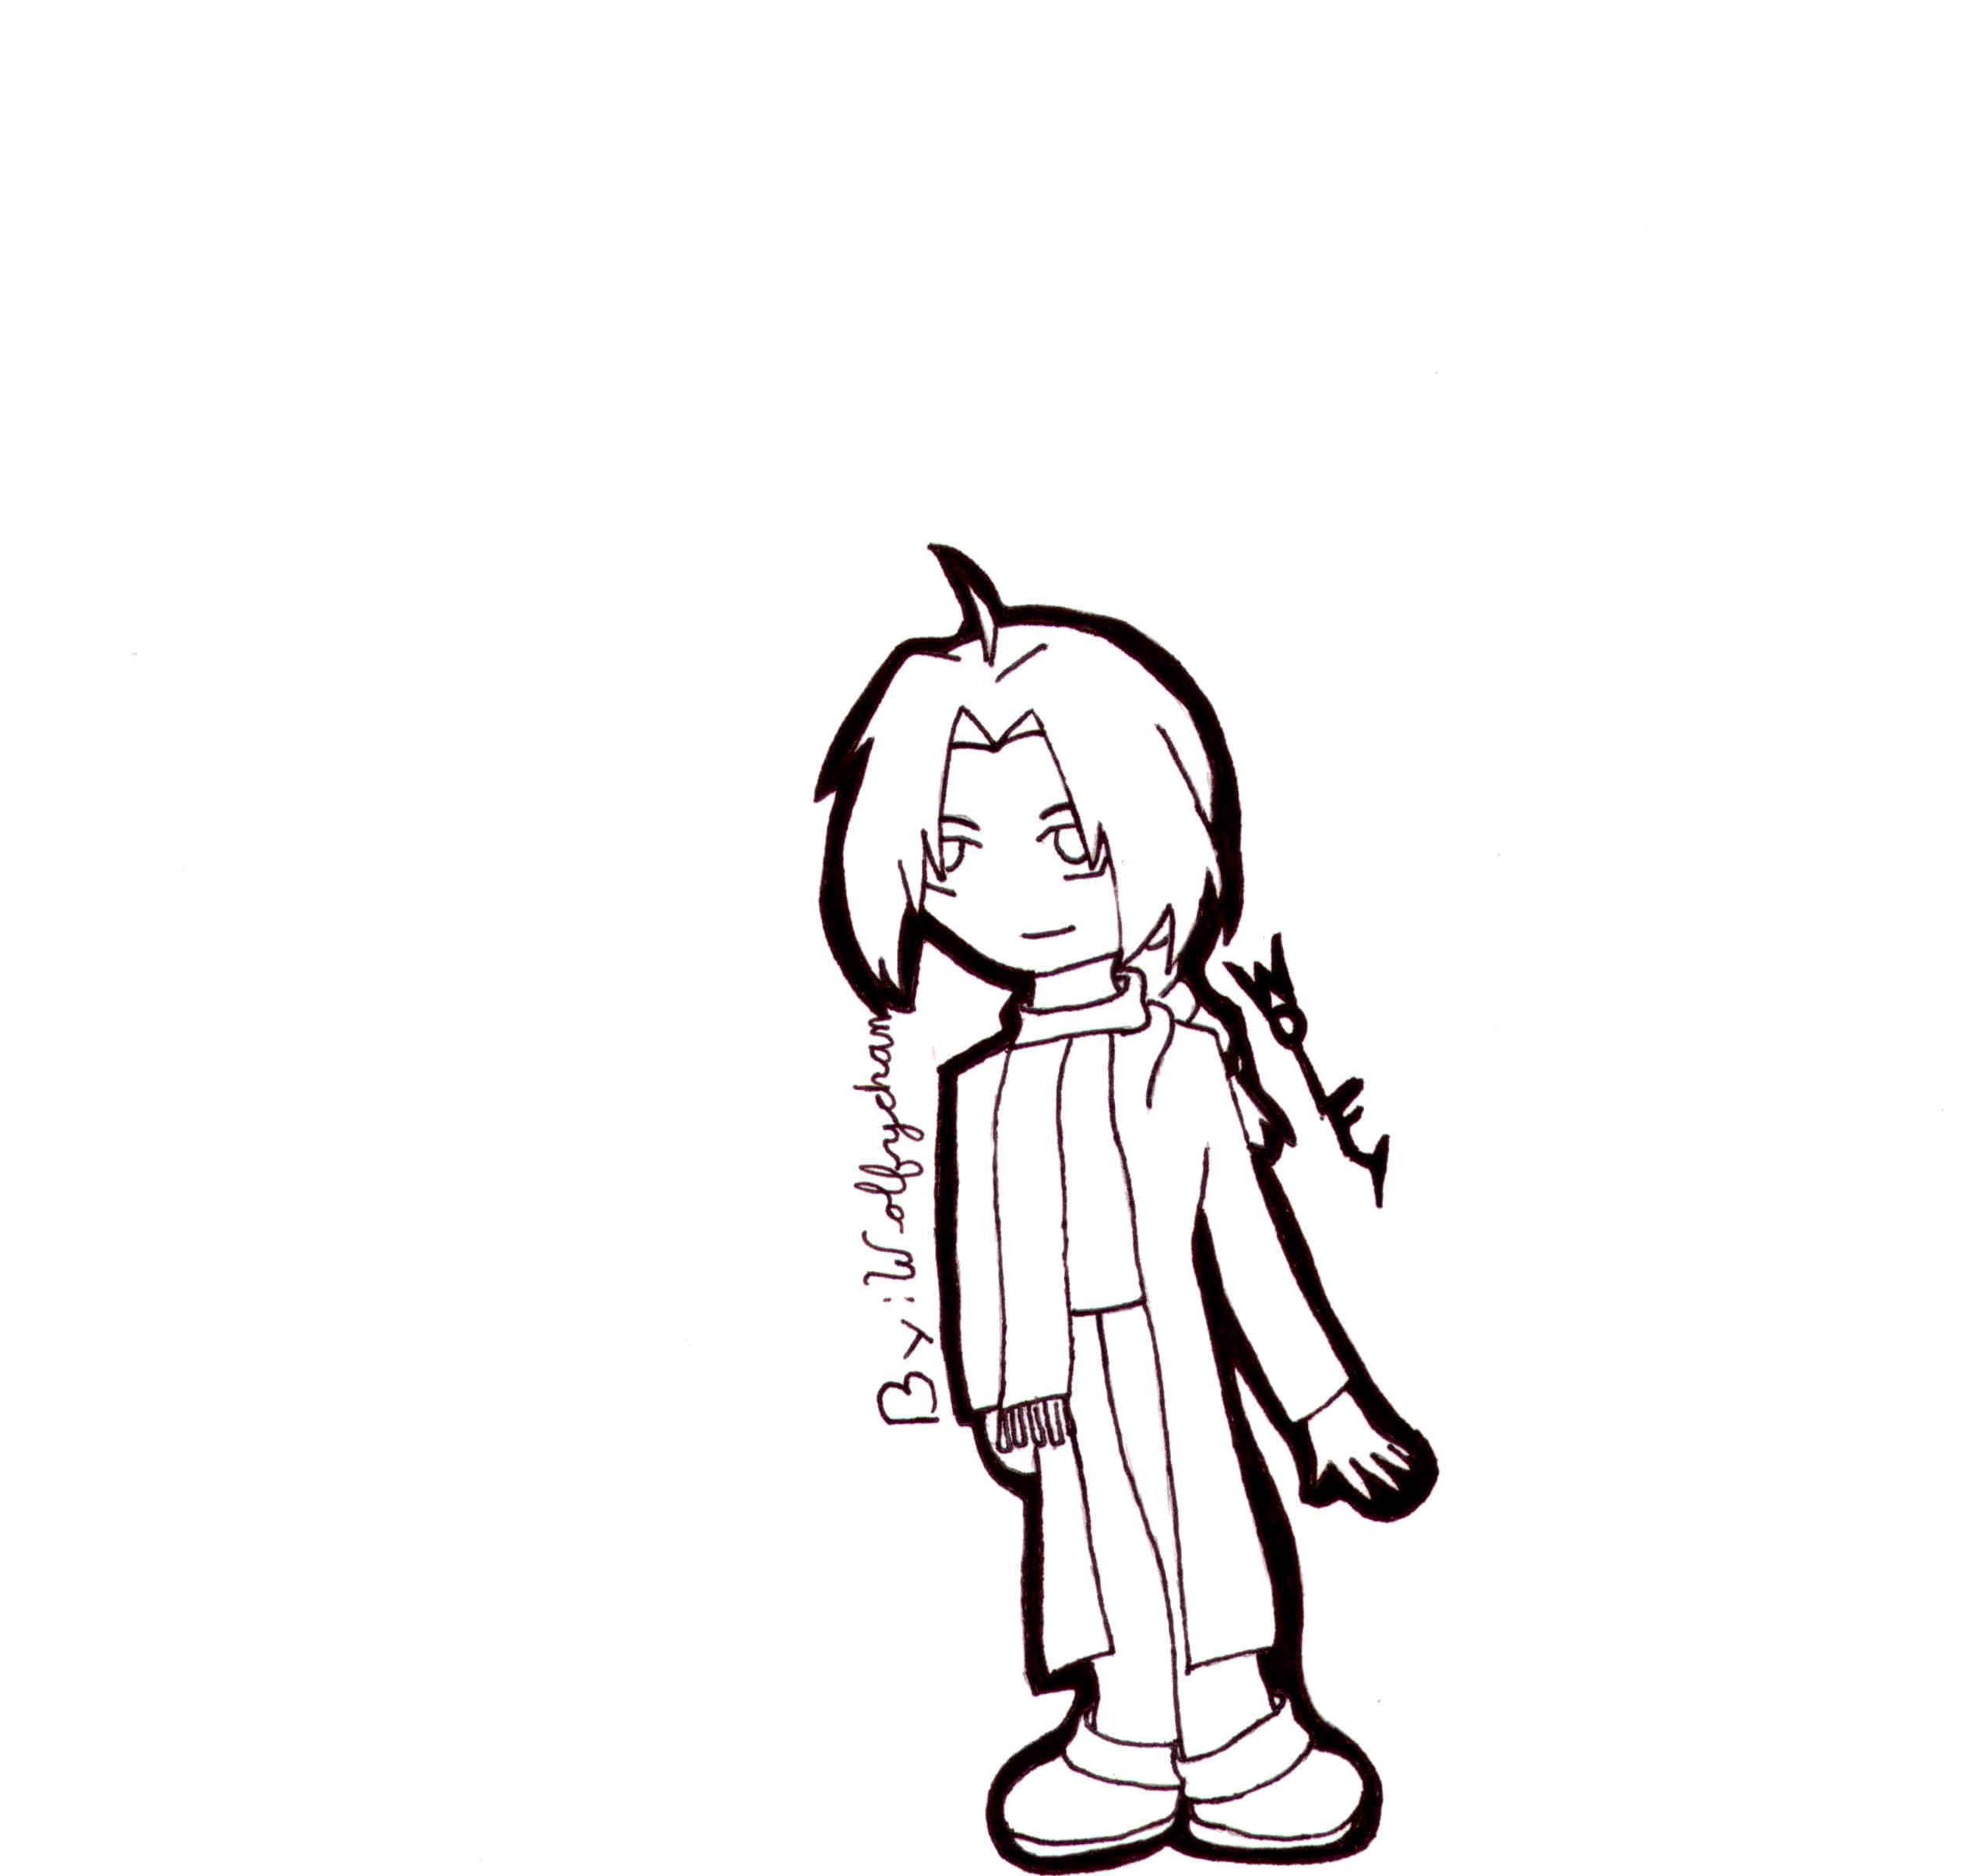 Winter Dashi (my style of chibi uncolored) by Wolfychan